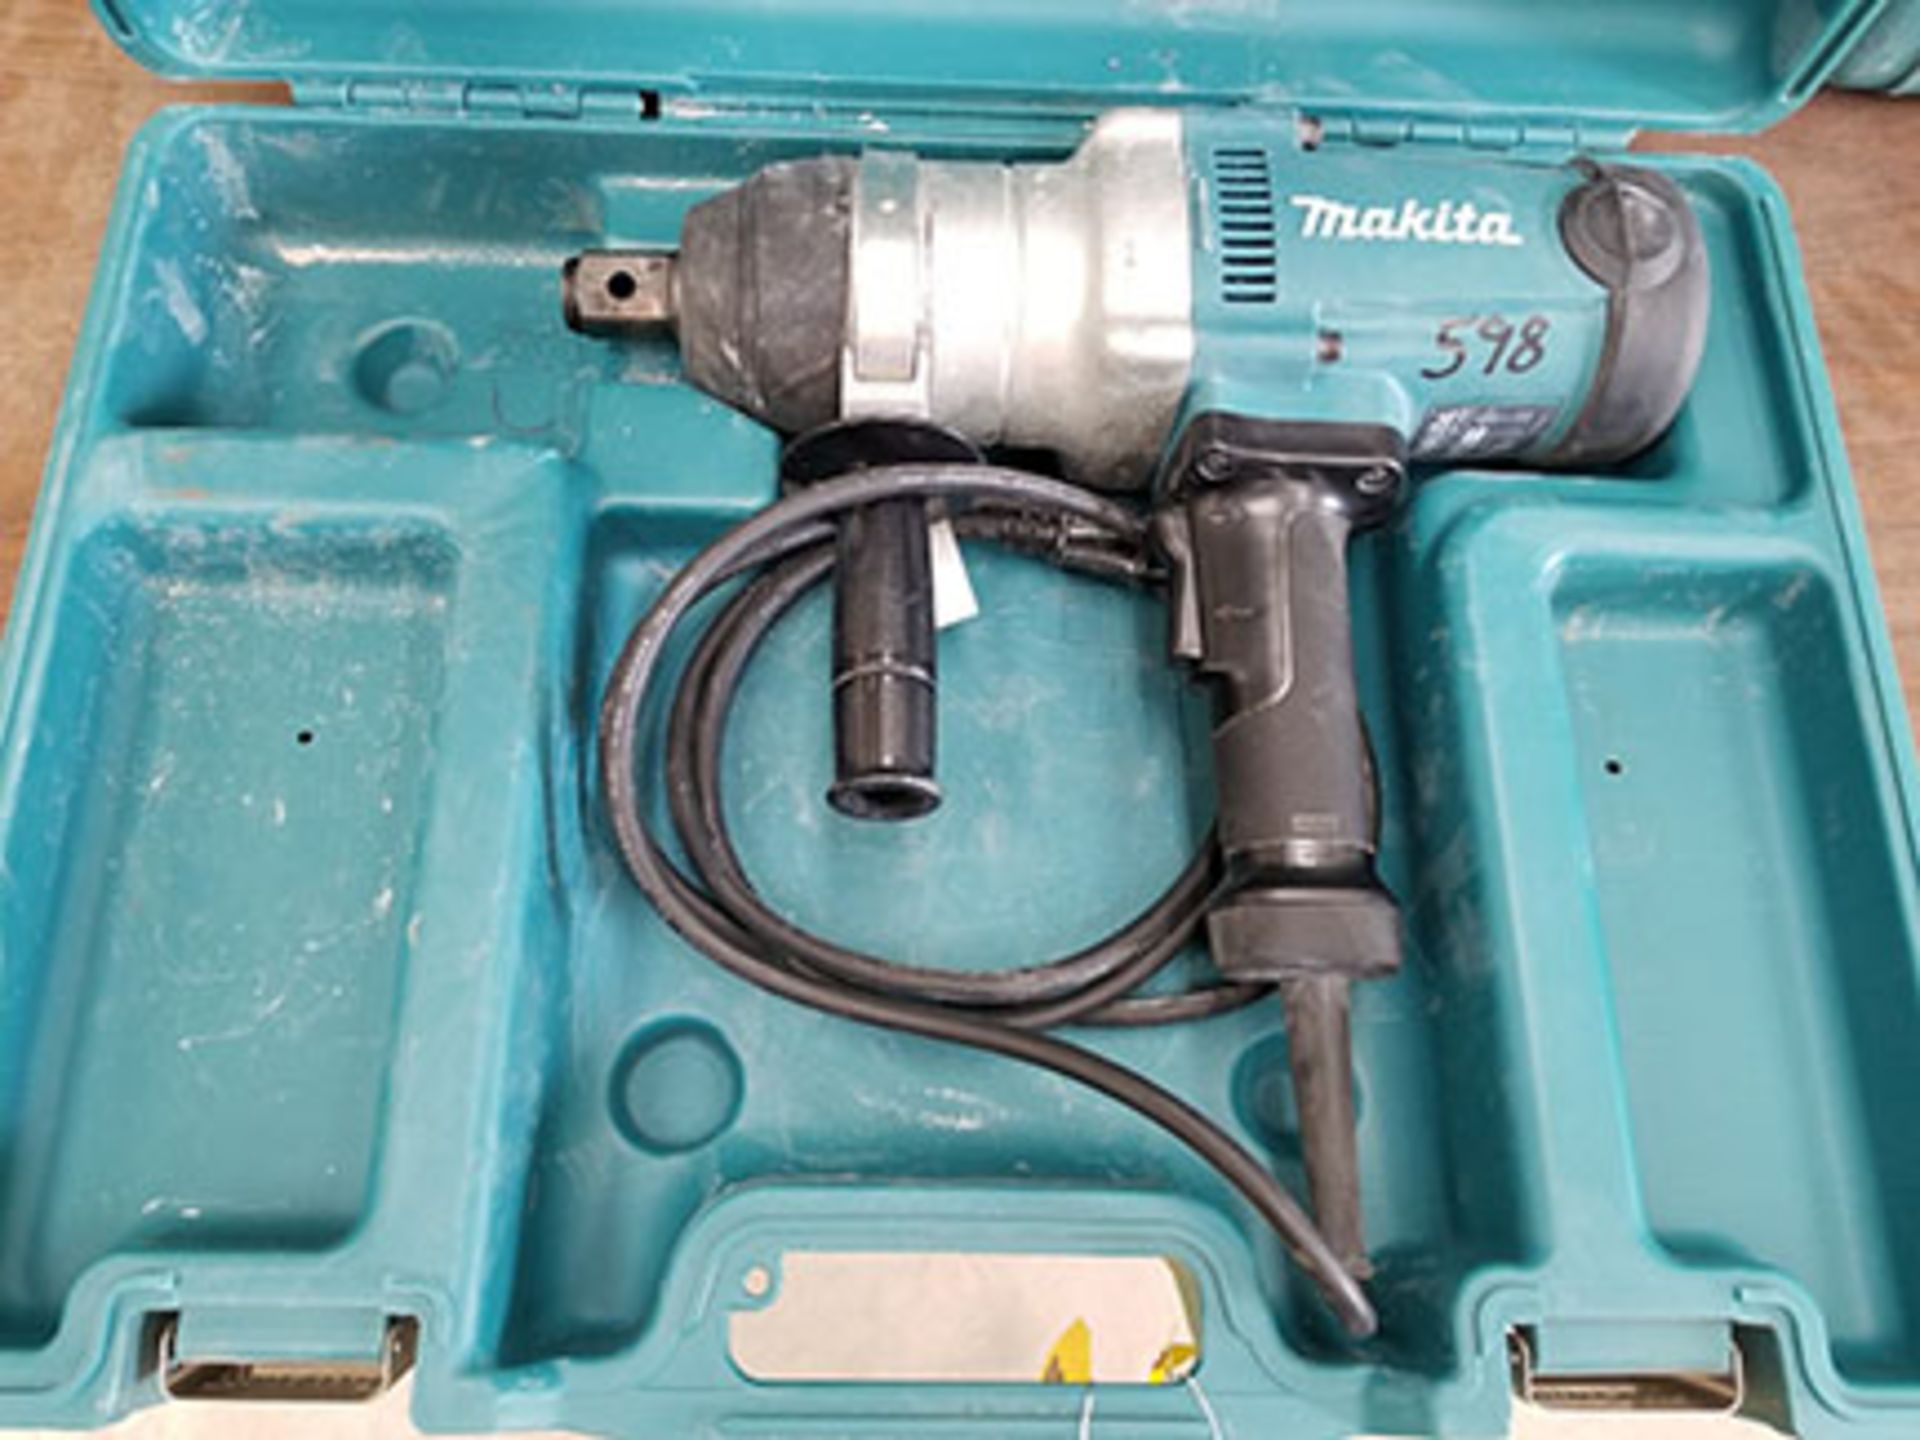 MAKITA TW1000 120V ELECTRIC IMPACT WRENCH, 1” DRIVE - Image 2 of 3